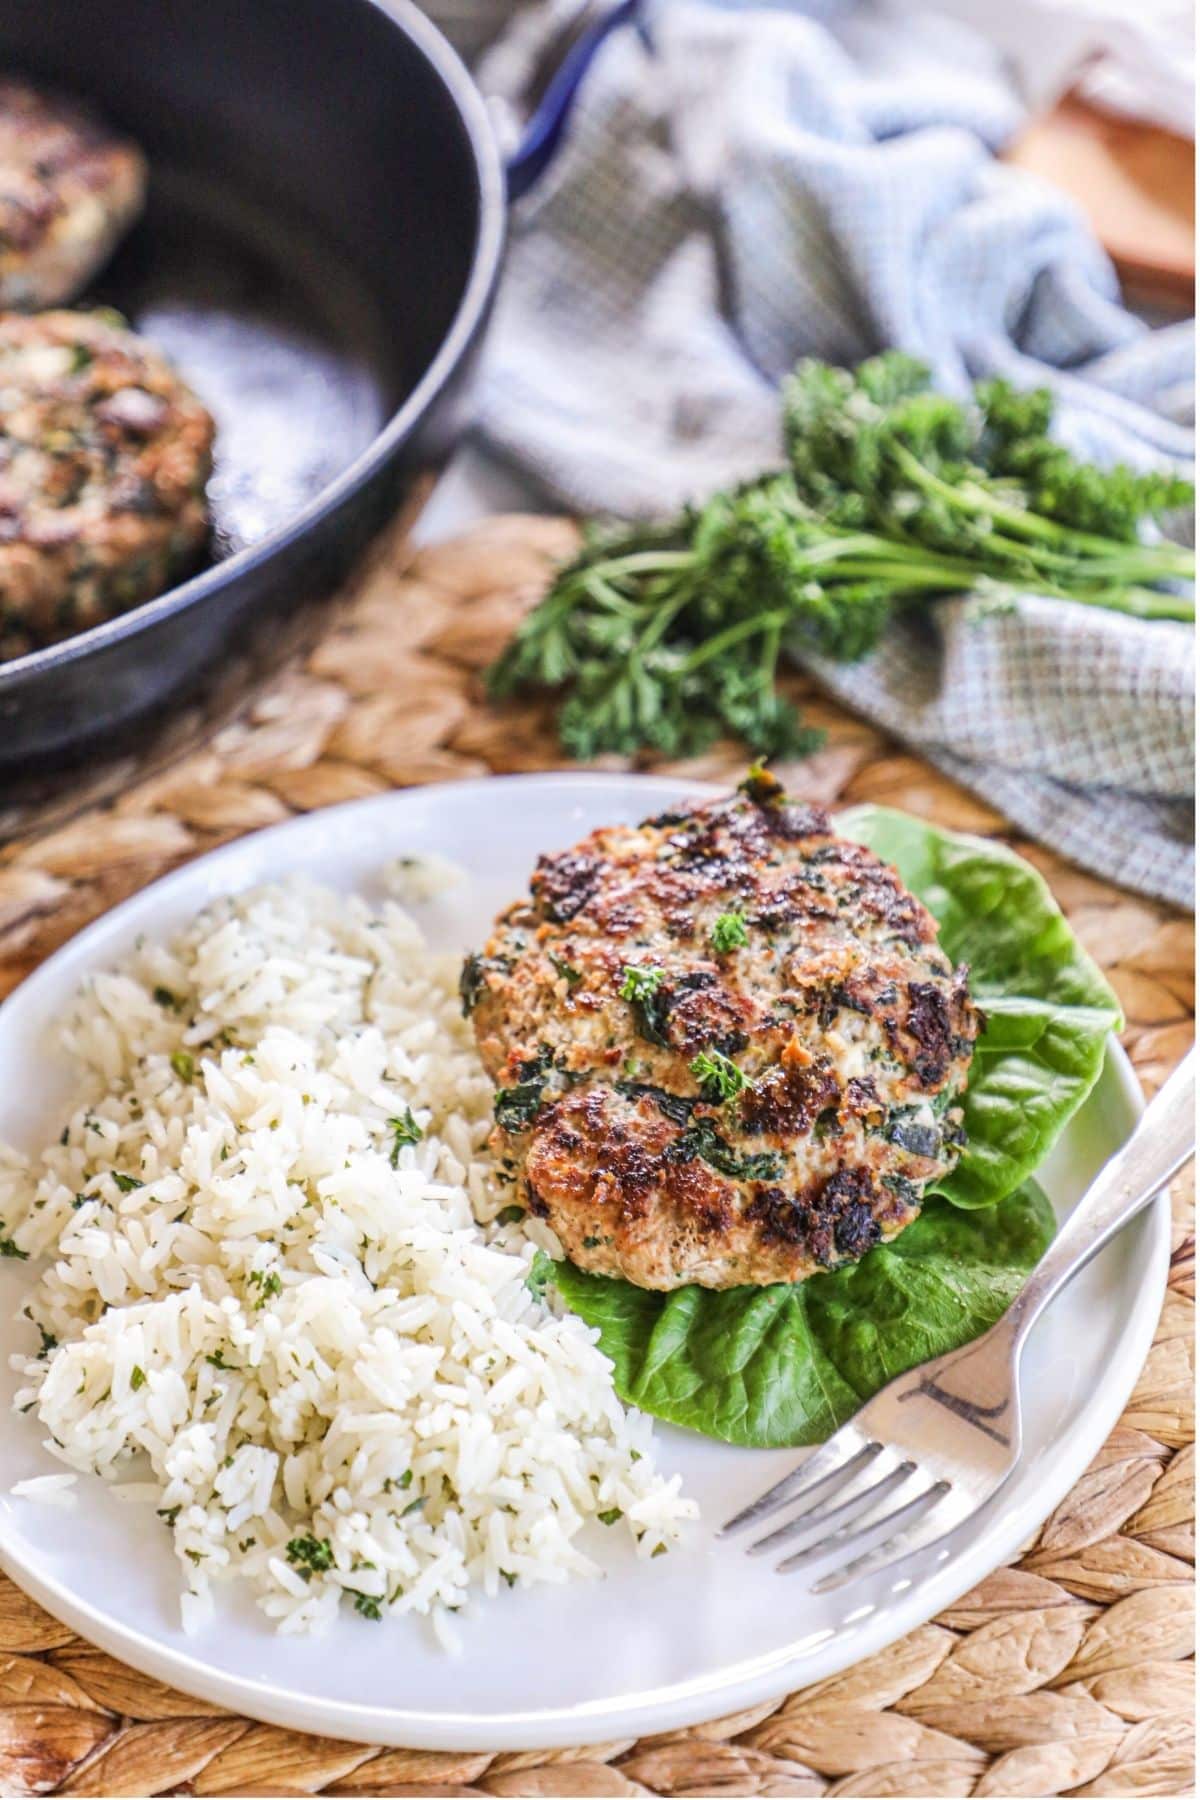 turkey spinach feta burger on a plate with a side of rice